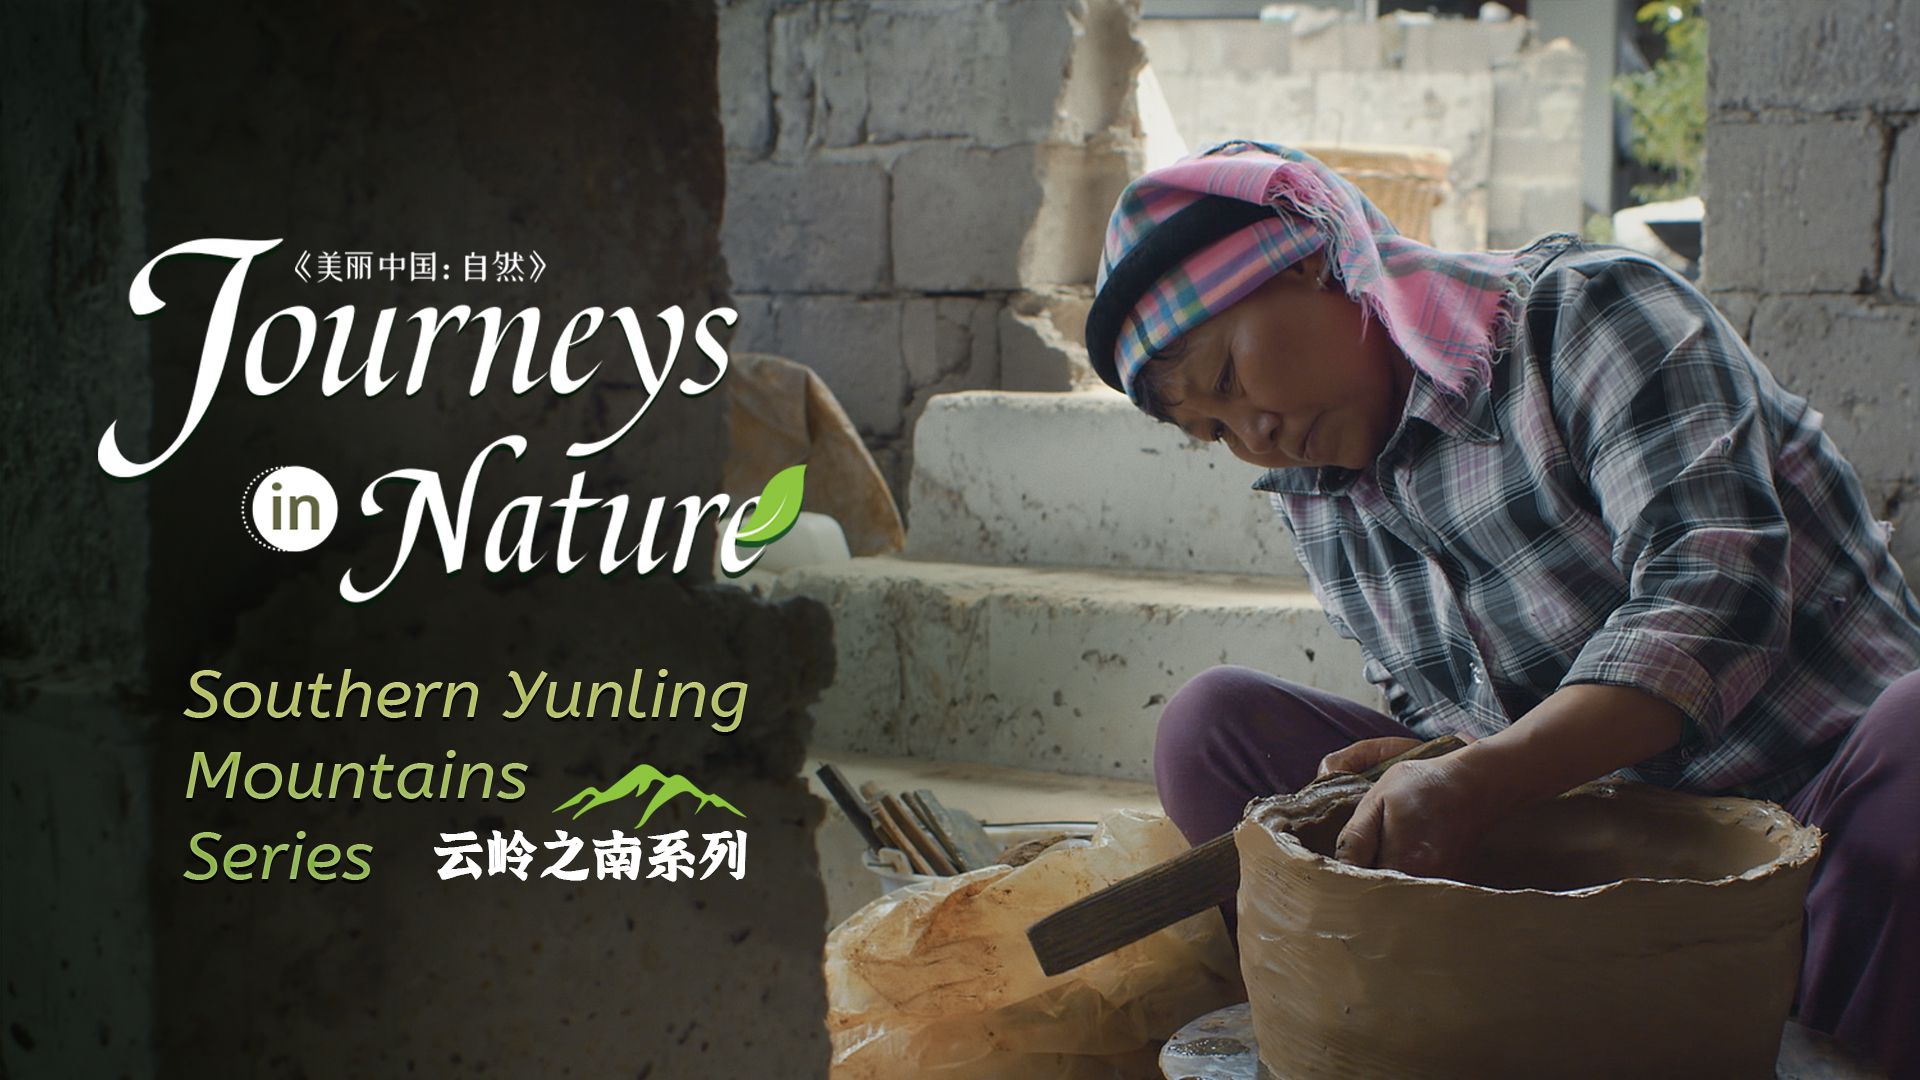 Southern Yunling Mountains Series Ep. 10: How to make earthen pottery